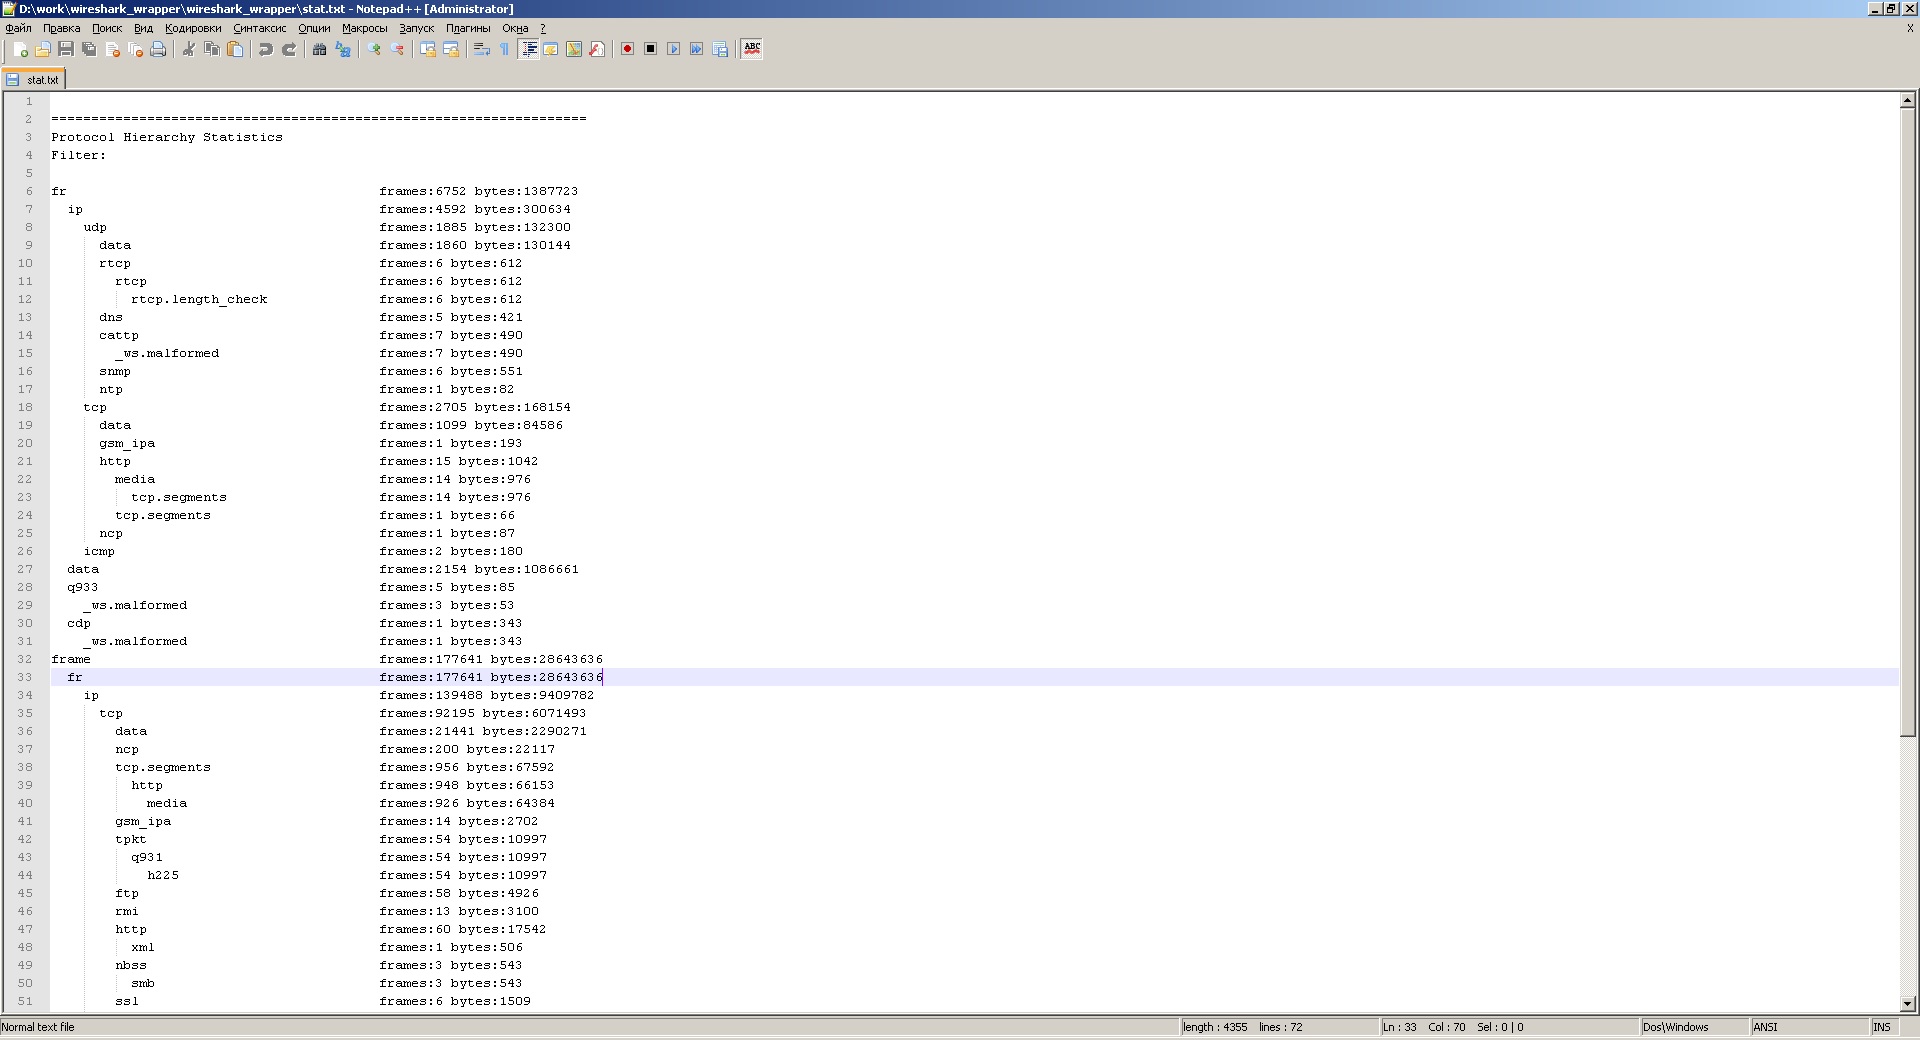 parsing stats from wireshark captures